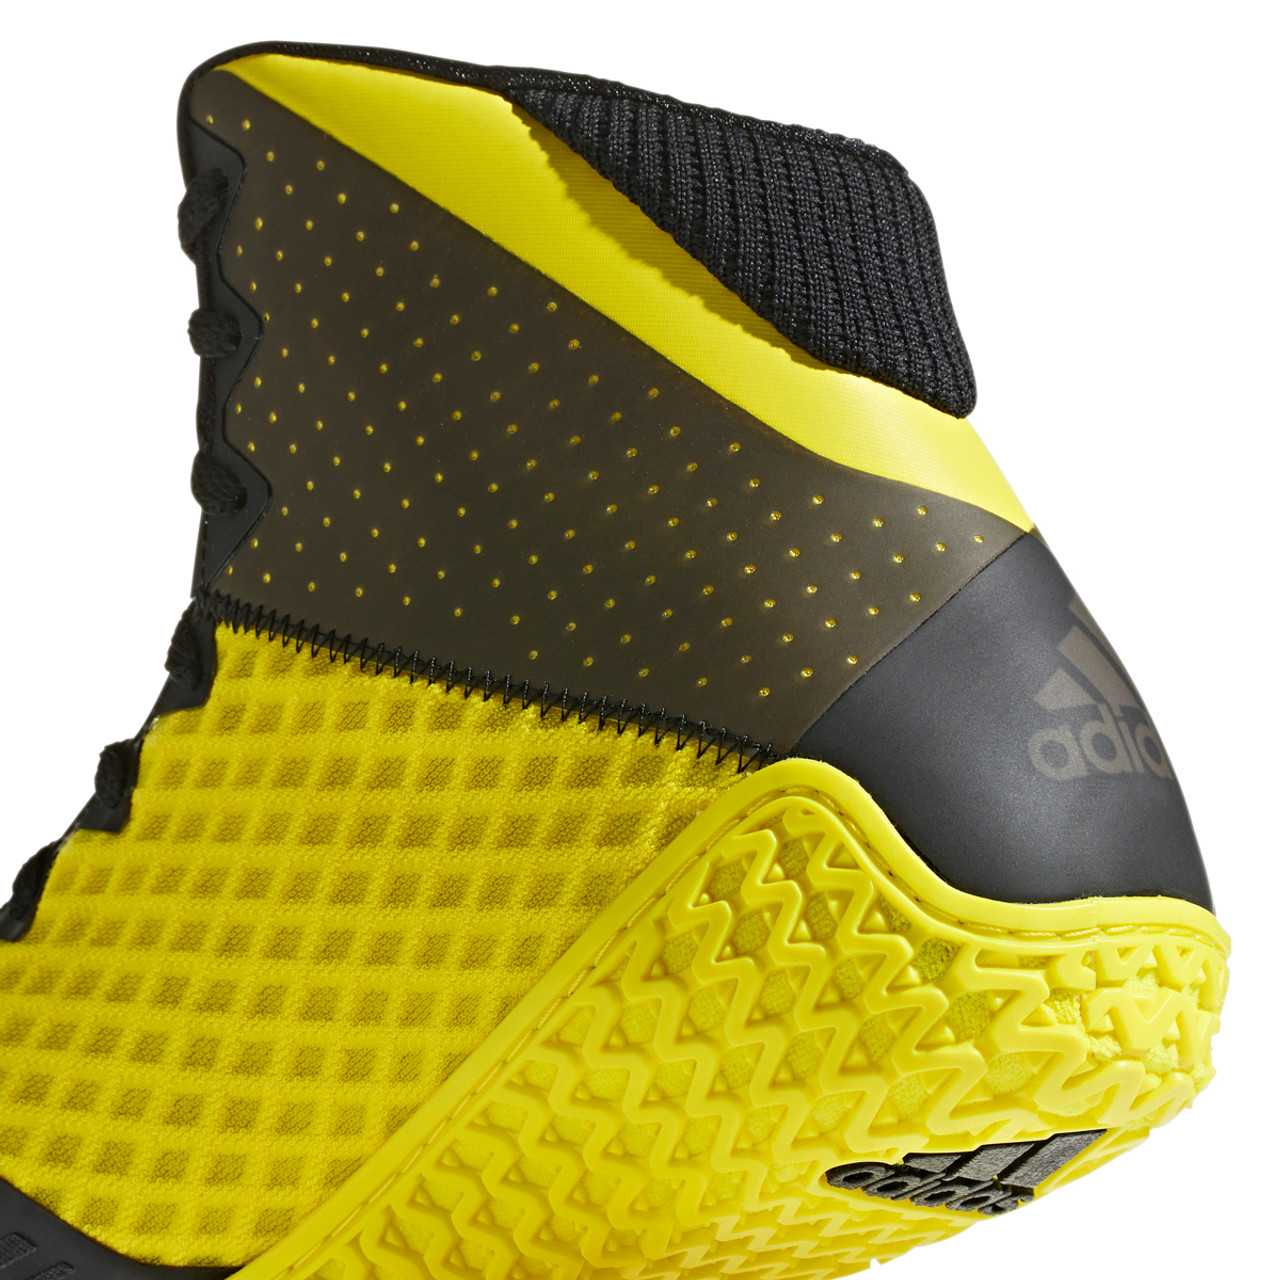 Adidas Mat Wizard 4 Adult Wrestling Shoes AC8708 - Yellow, Black